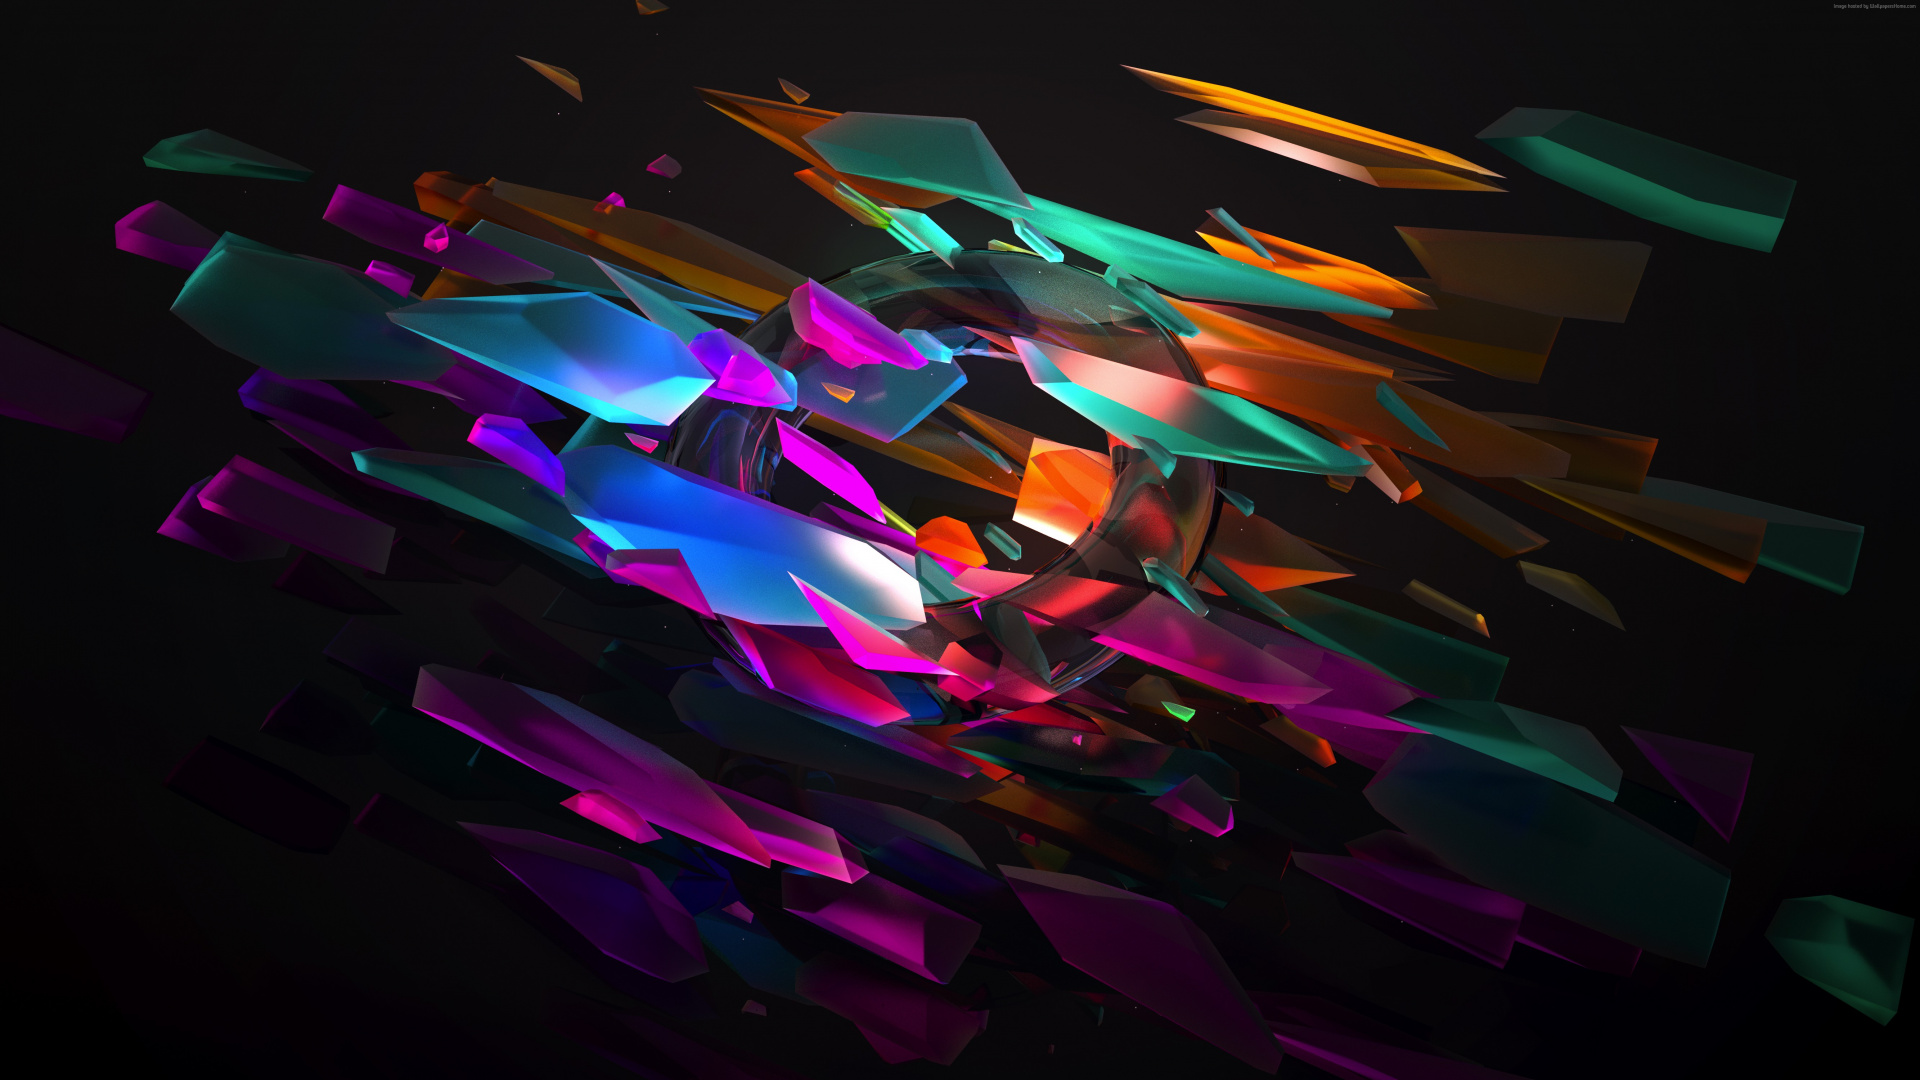 Purple Orange and Blue Abstract Art. Wallpaper in 1920x1080 Resolution